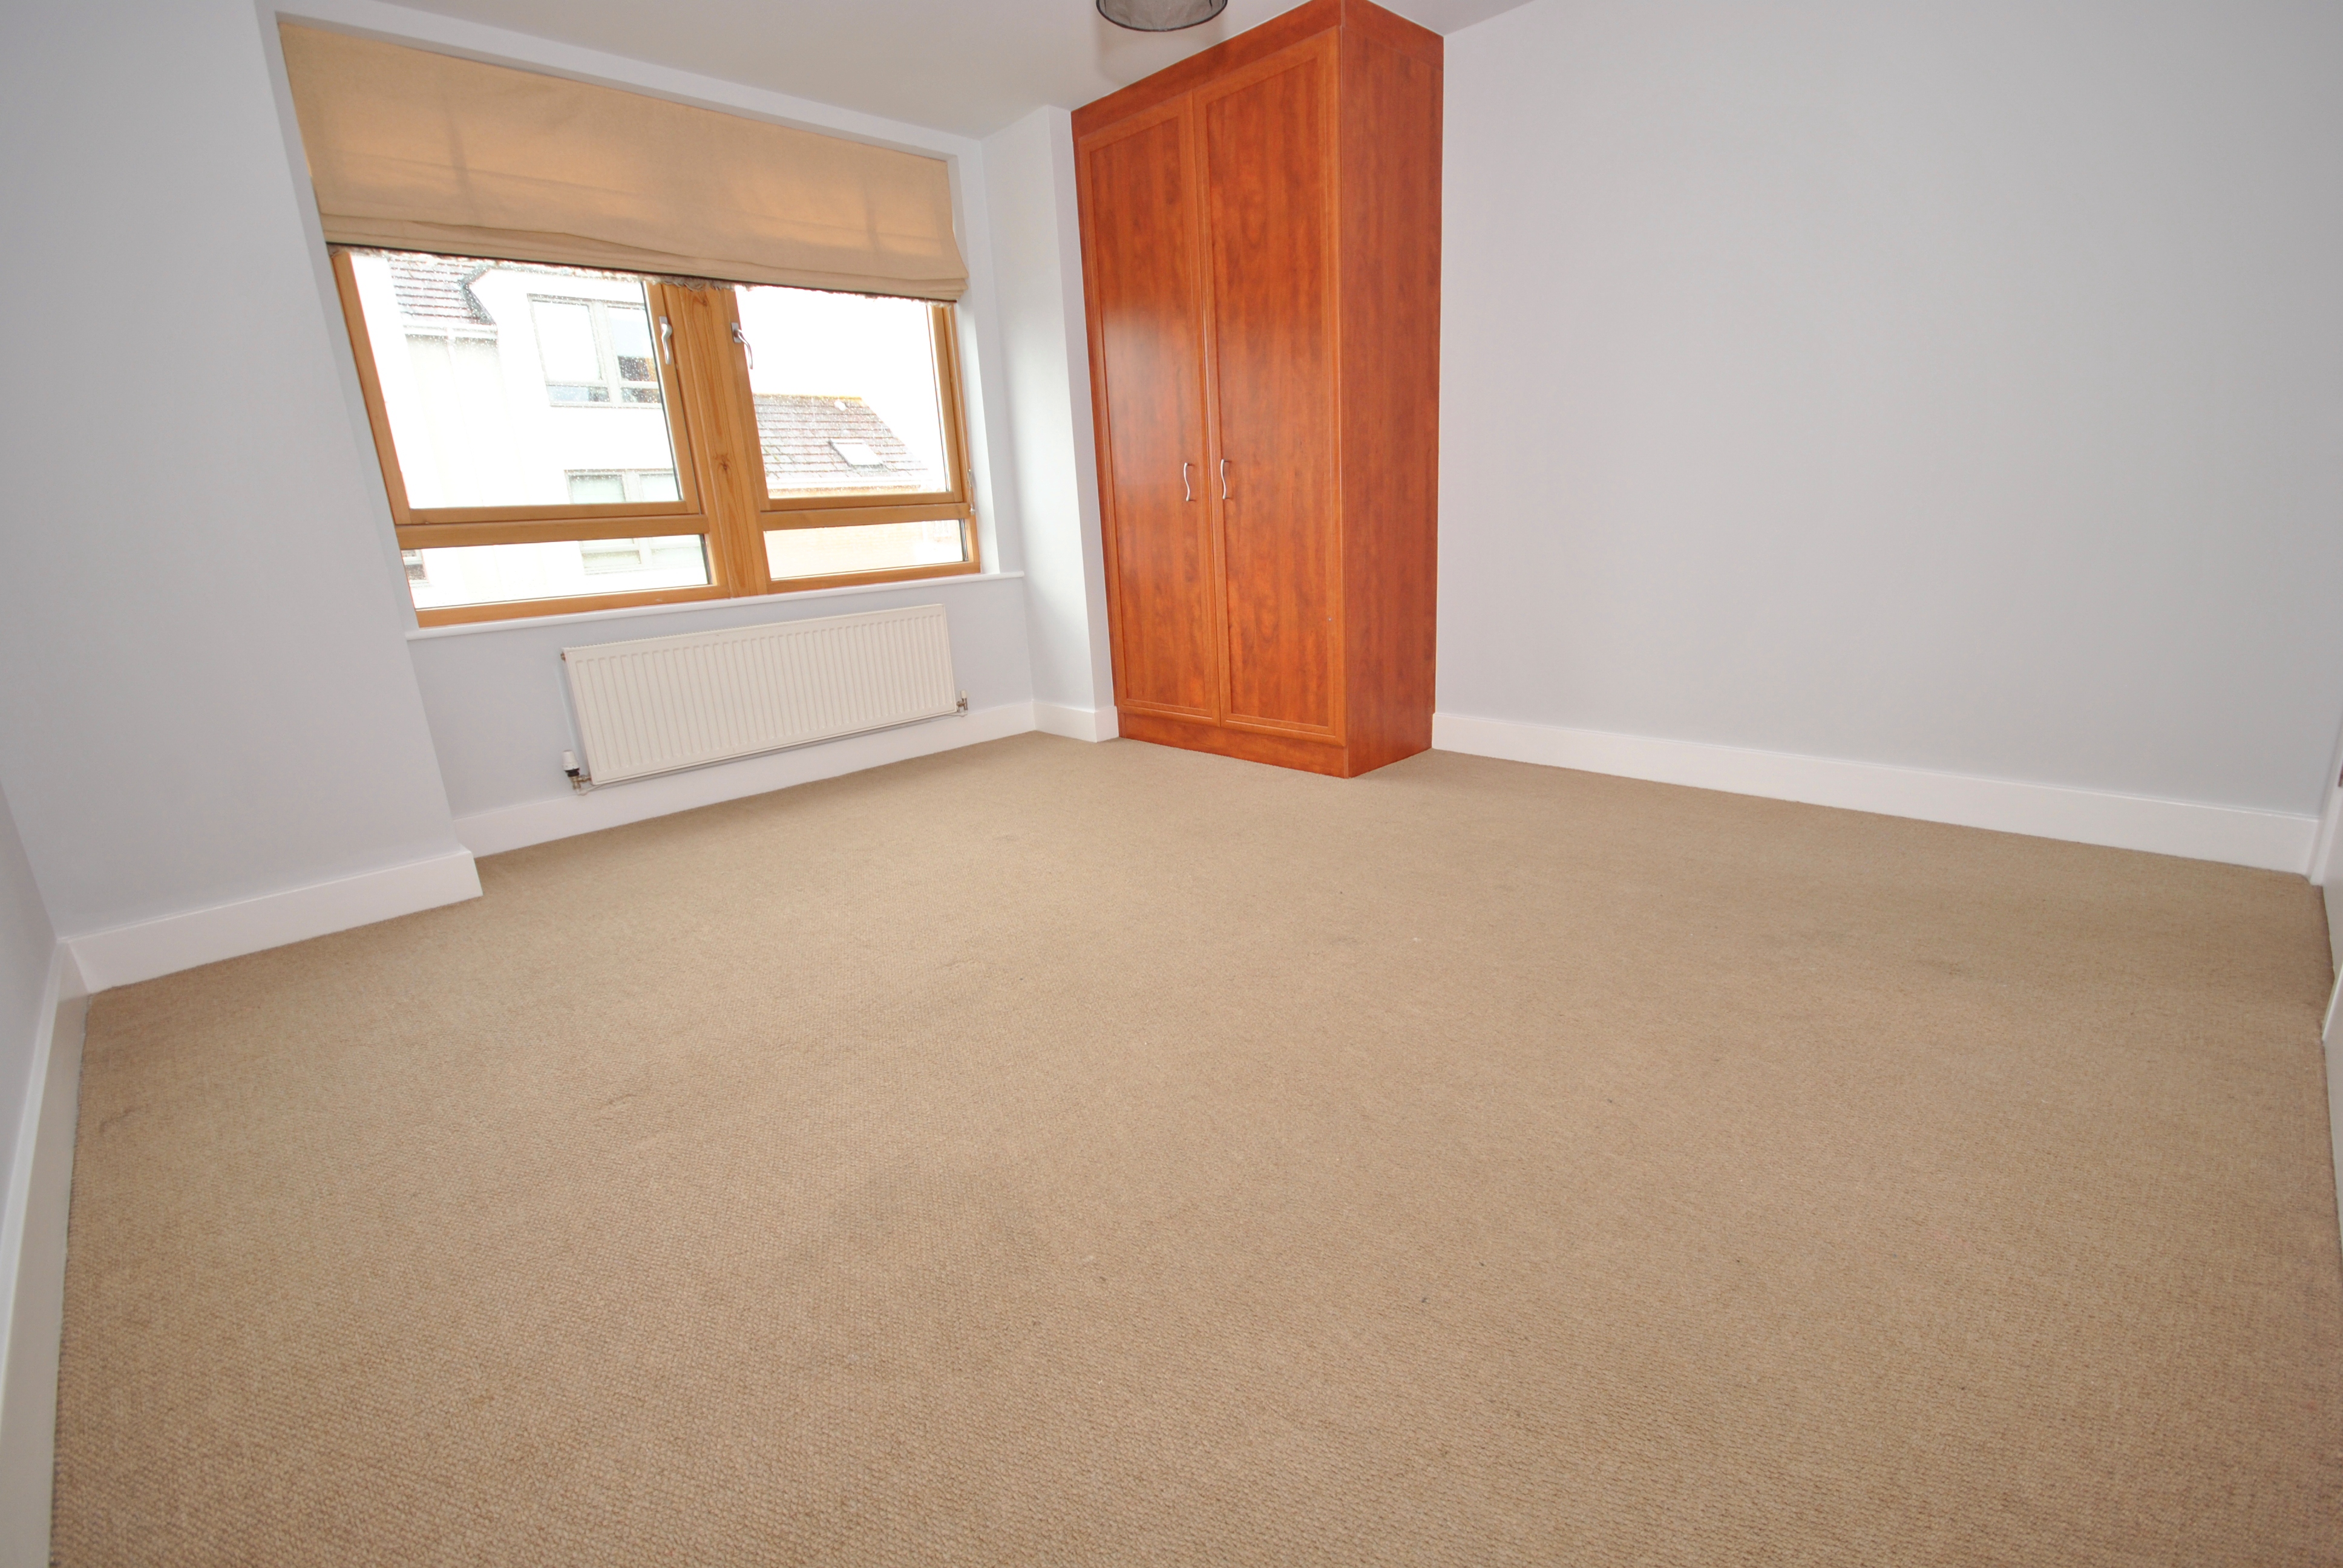 4 bed house to rent in Bingham Road, Radcliffe on Trent  - Property Image 5